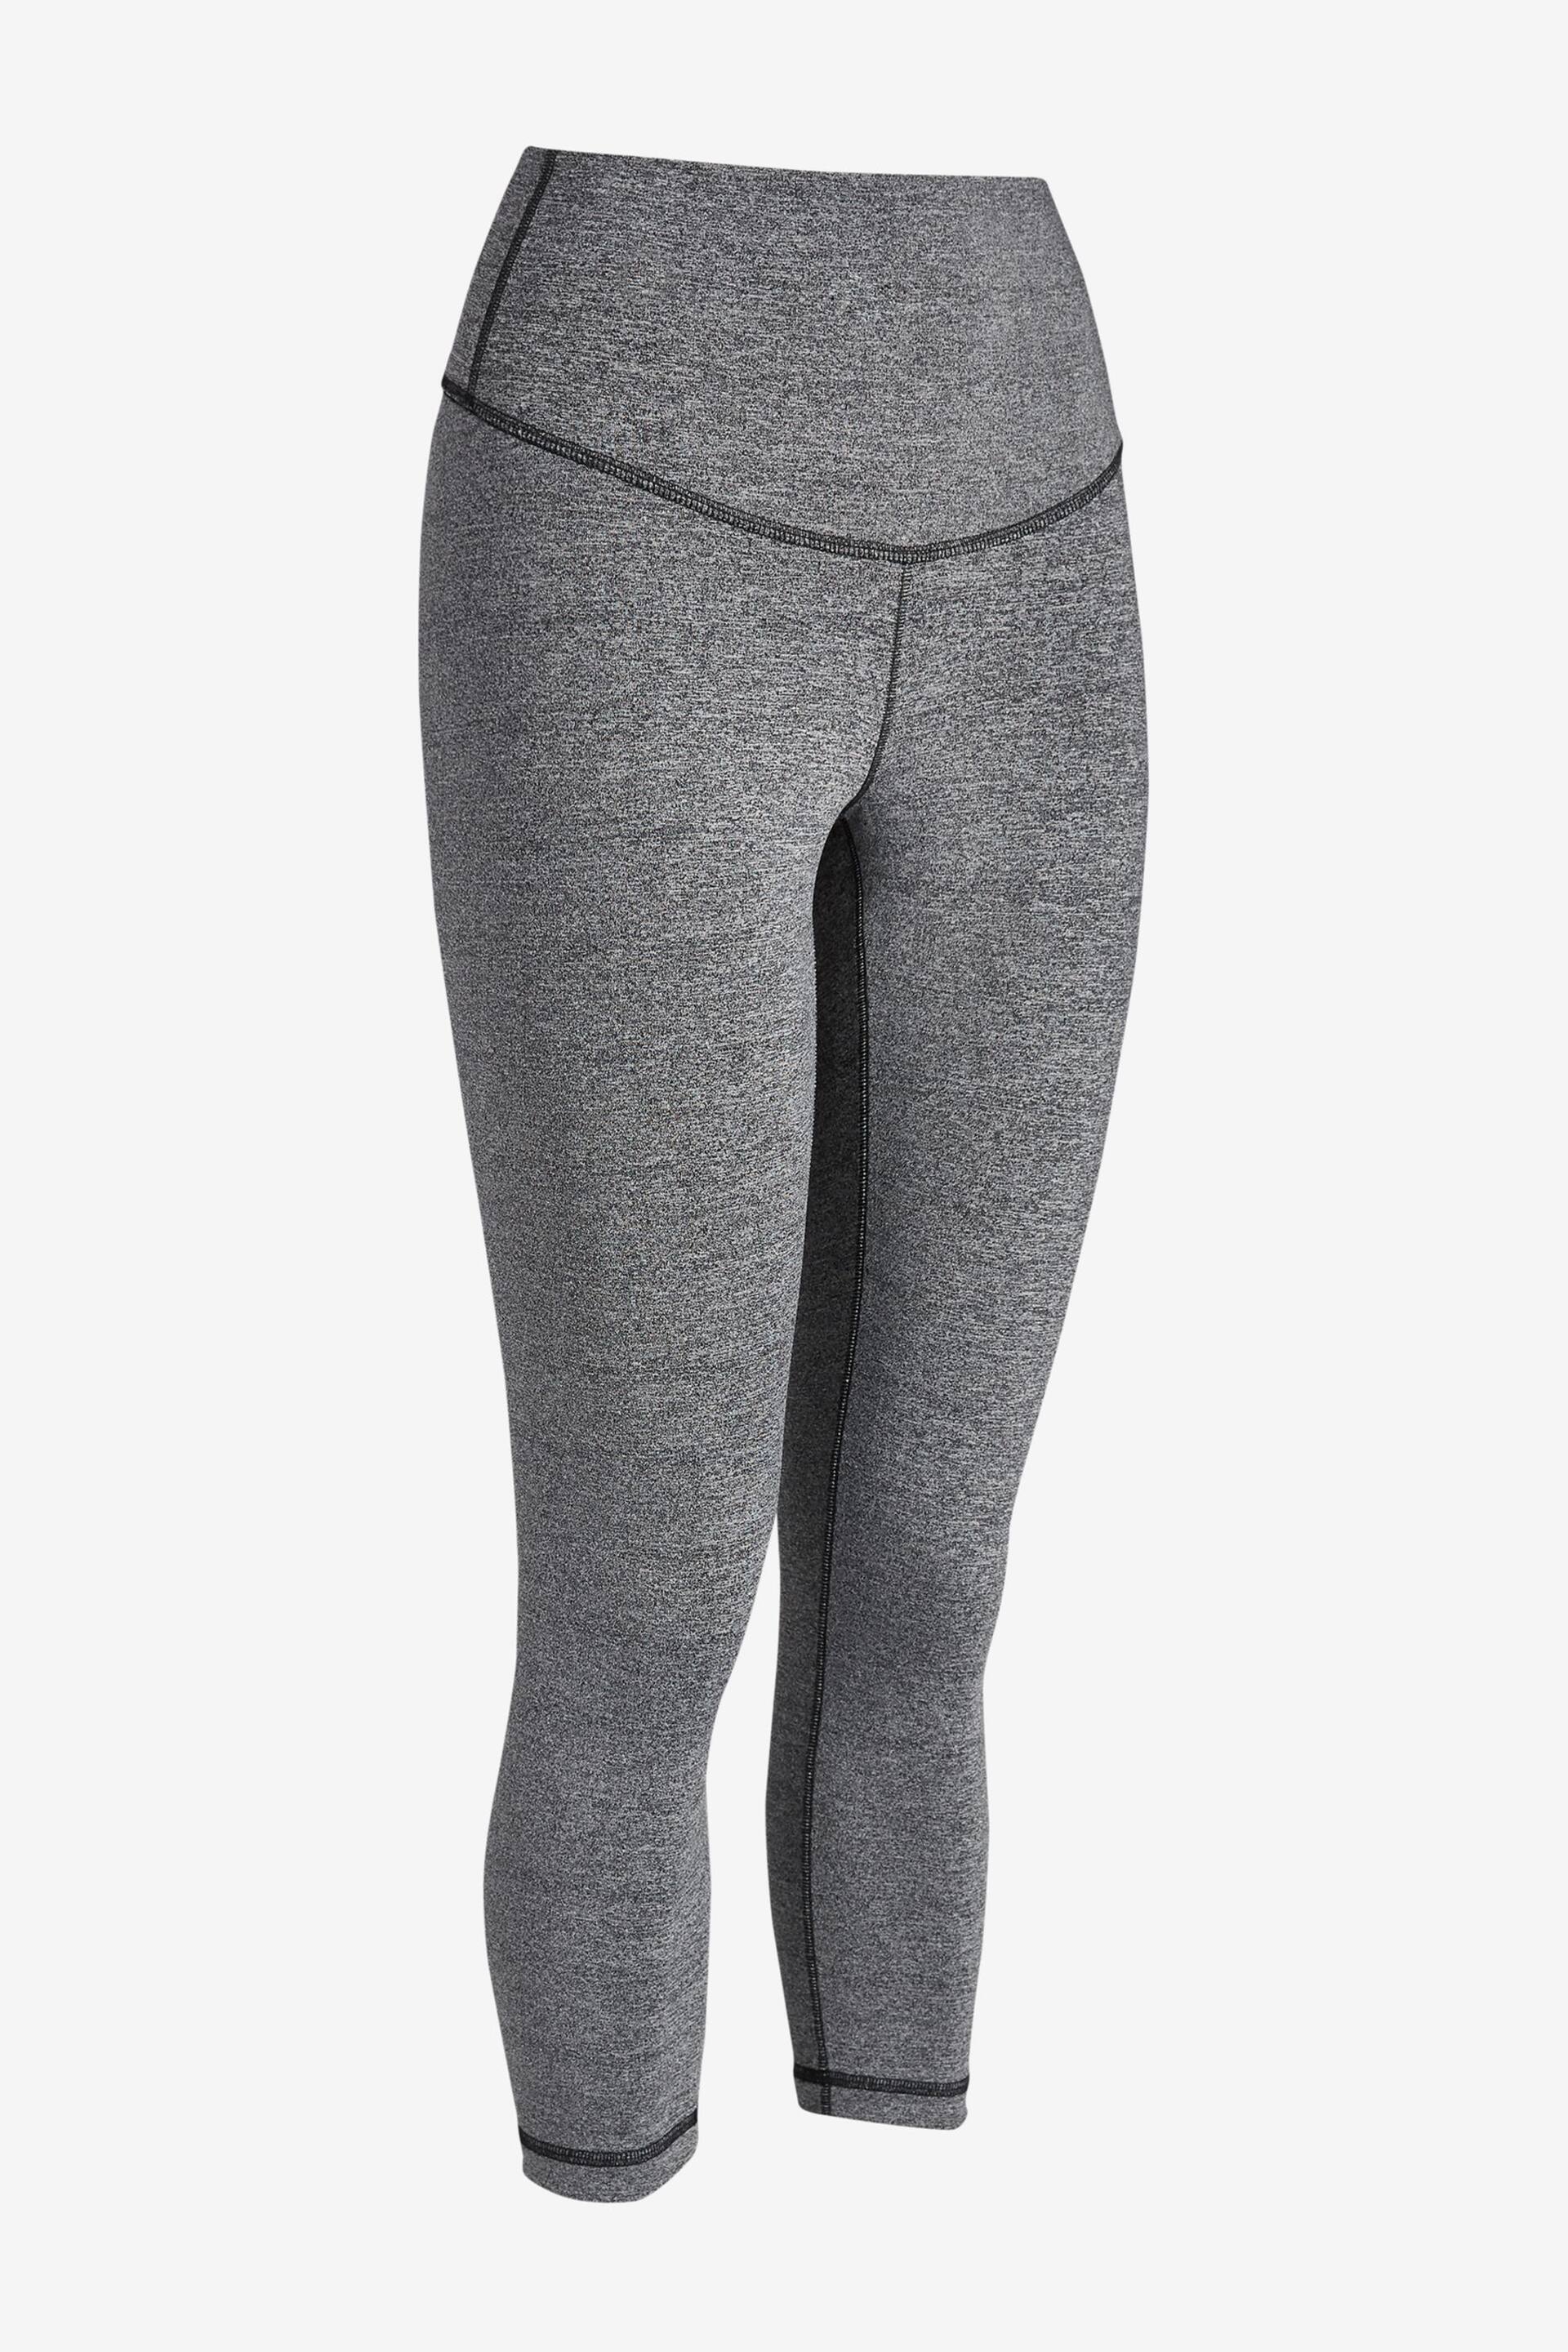 Grey Next Active Sports High Waisted Cropped Sculpting Leggings - Image 5 of 6